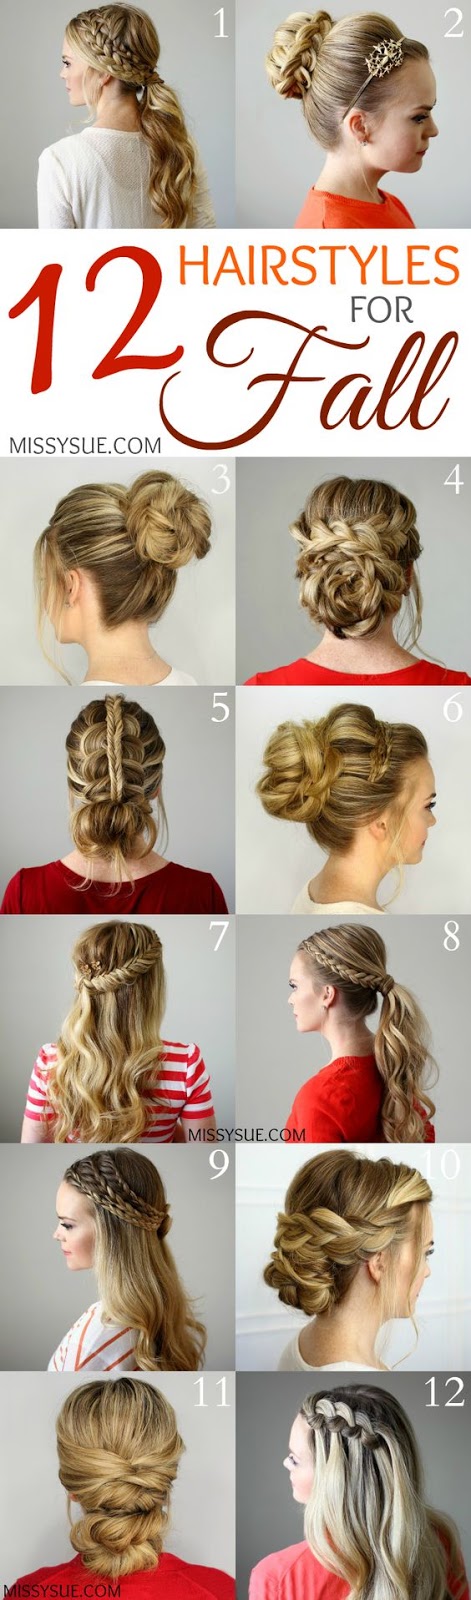 12 Hairstyles for Fall